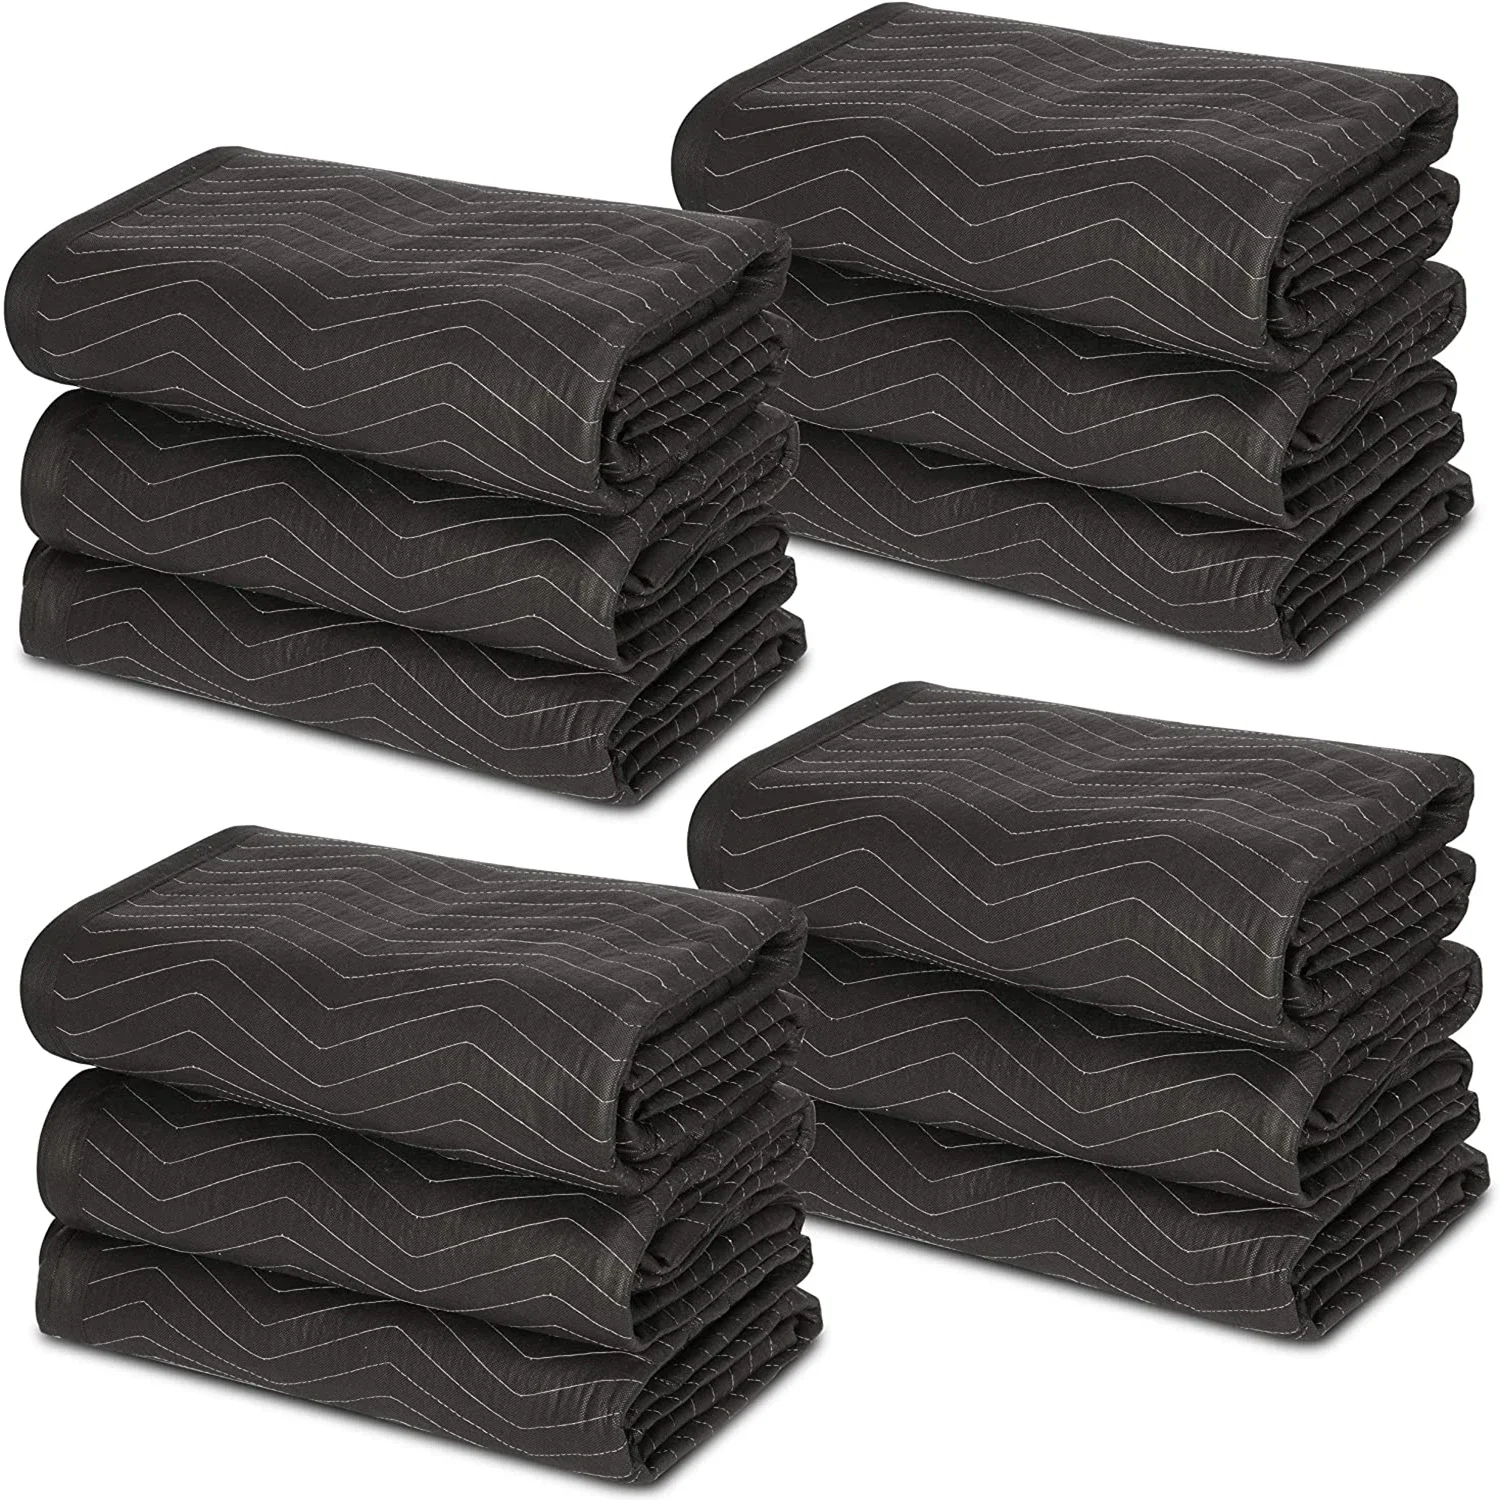 

12-Pack 80 x 72 inch Moving Blankets Heavy Duty Moving Pads for Protecting Furniture Quilted Shipping Furniture Pads